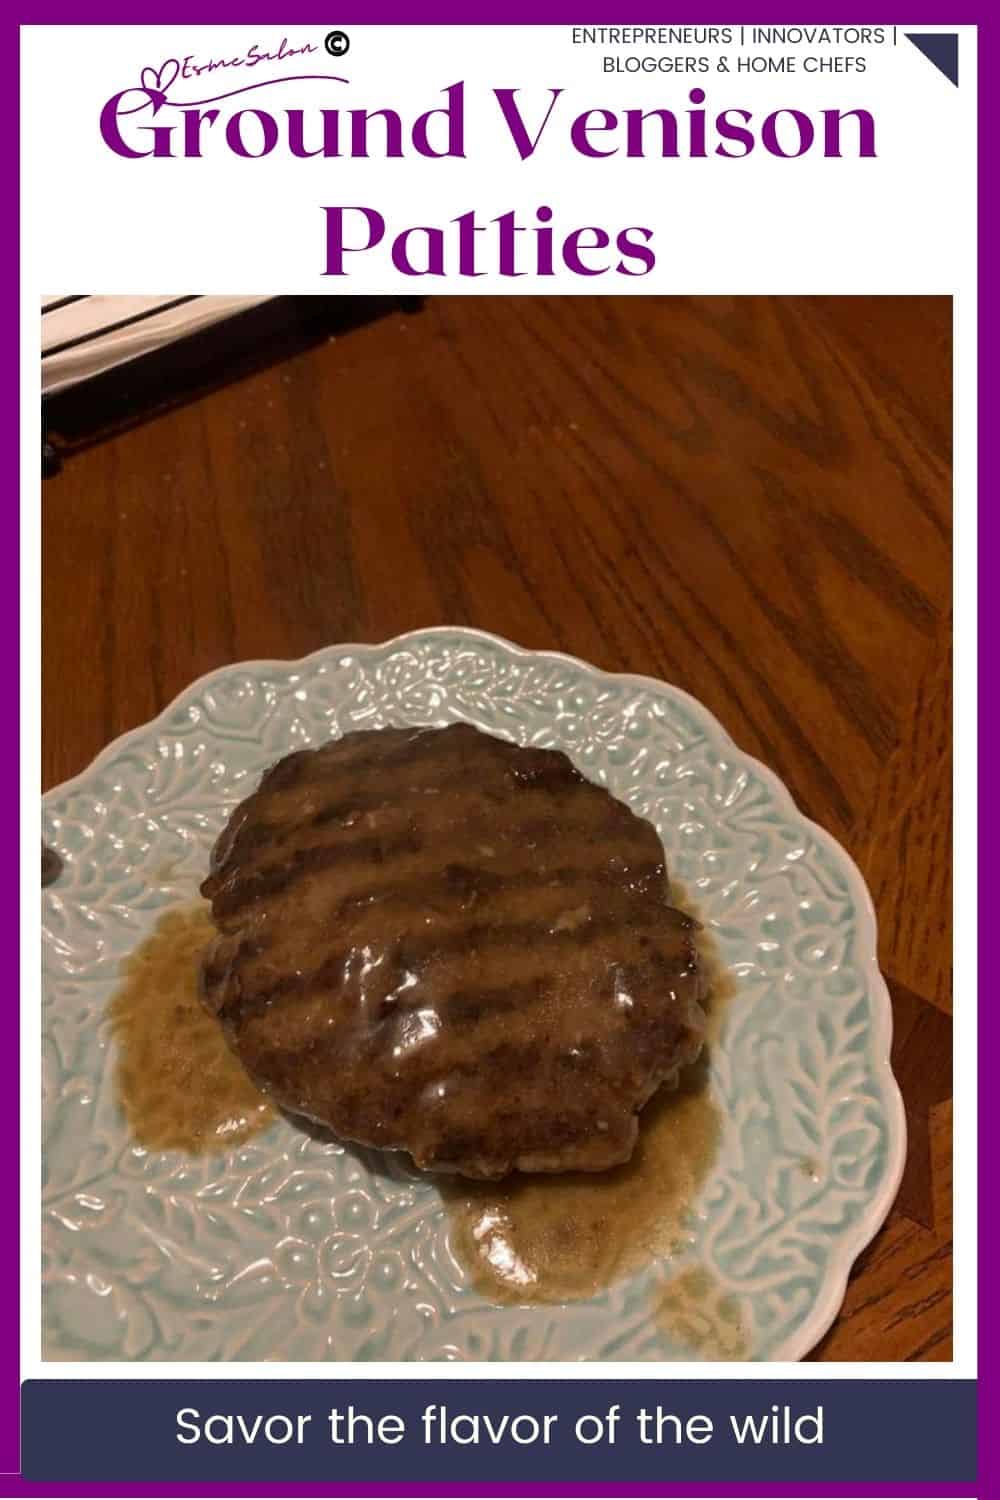 an image of Ground Venison Patties plated